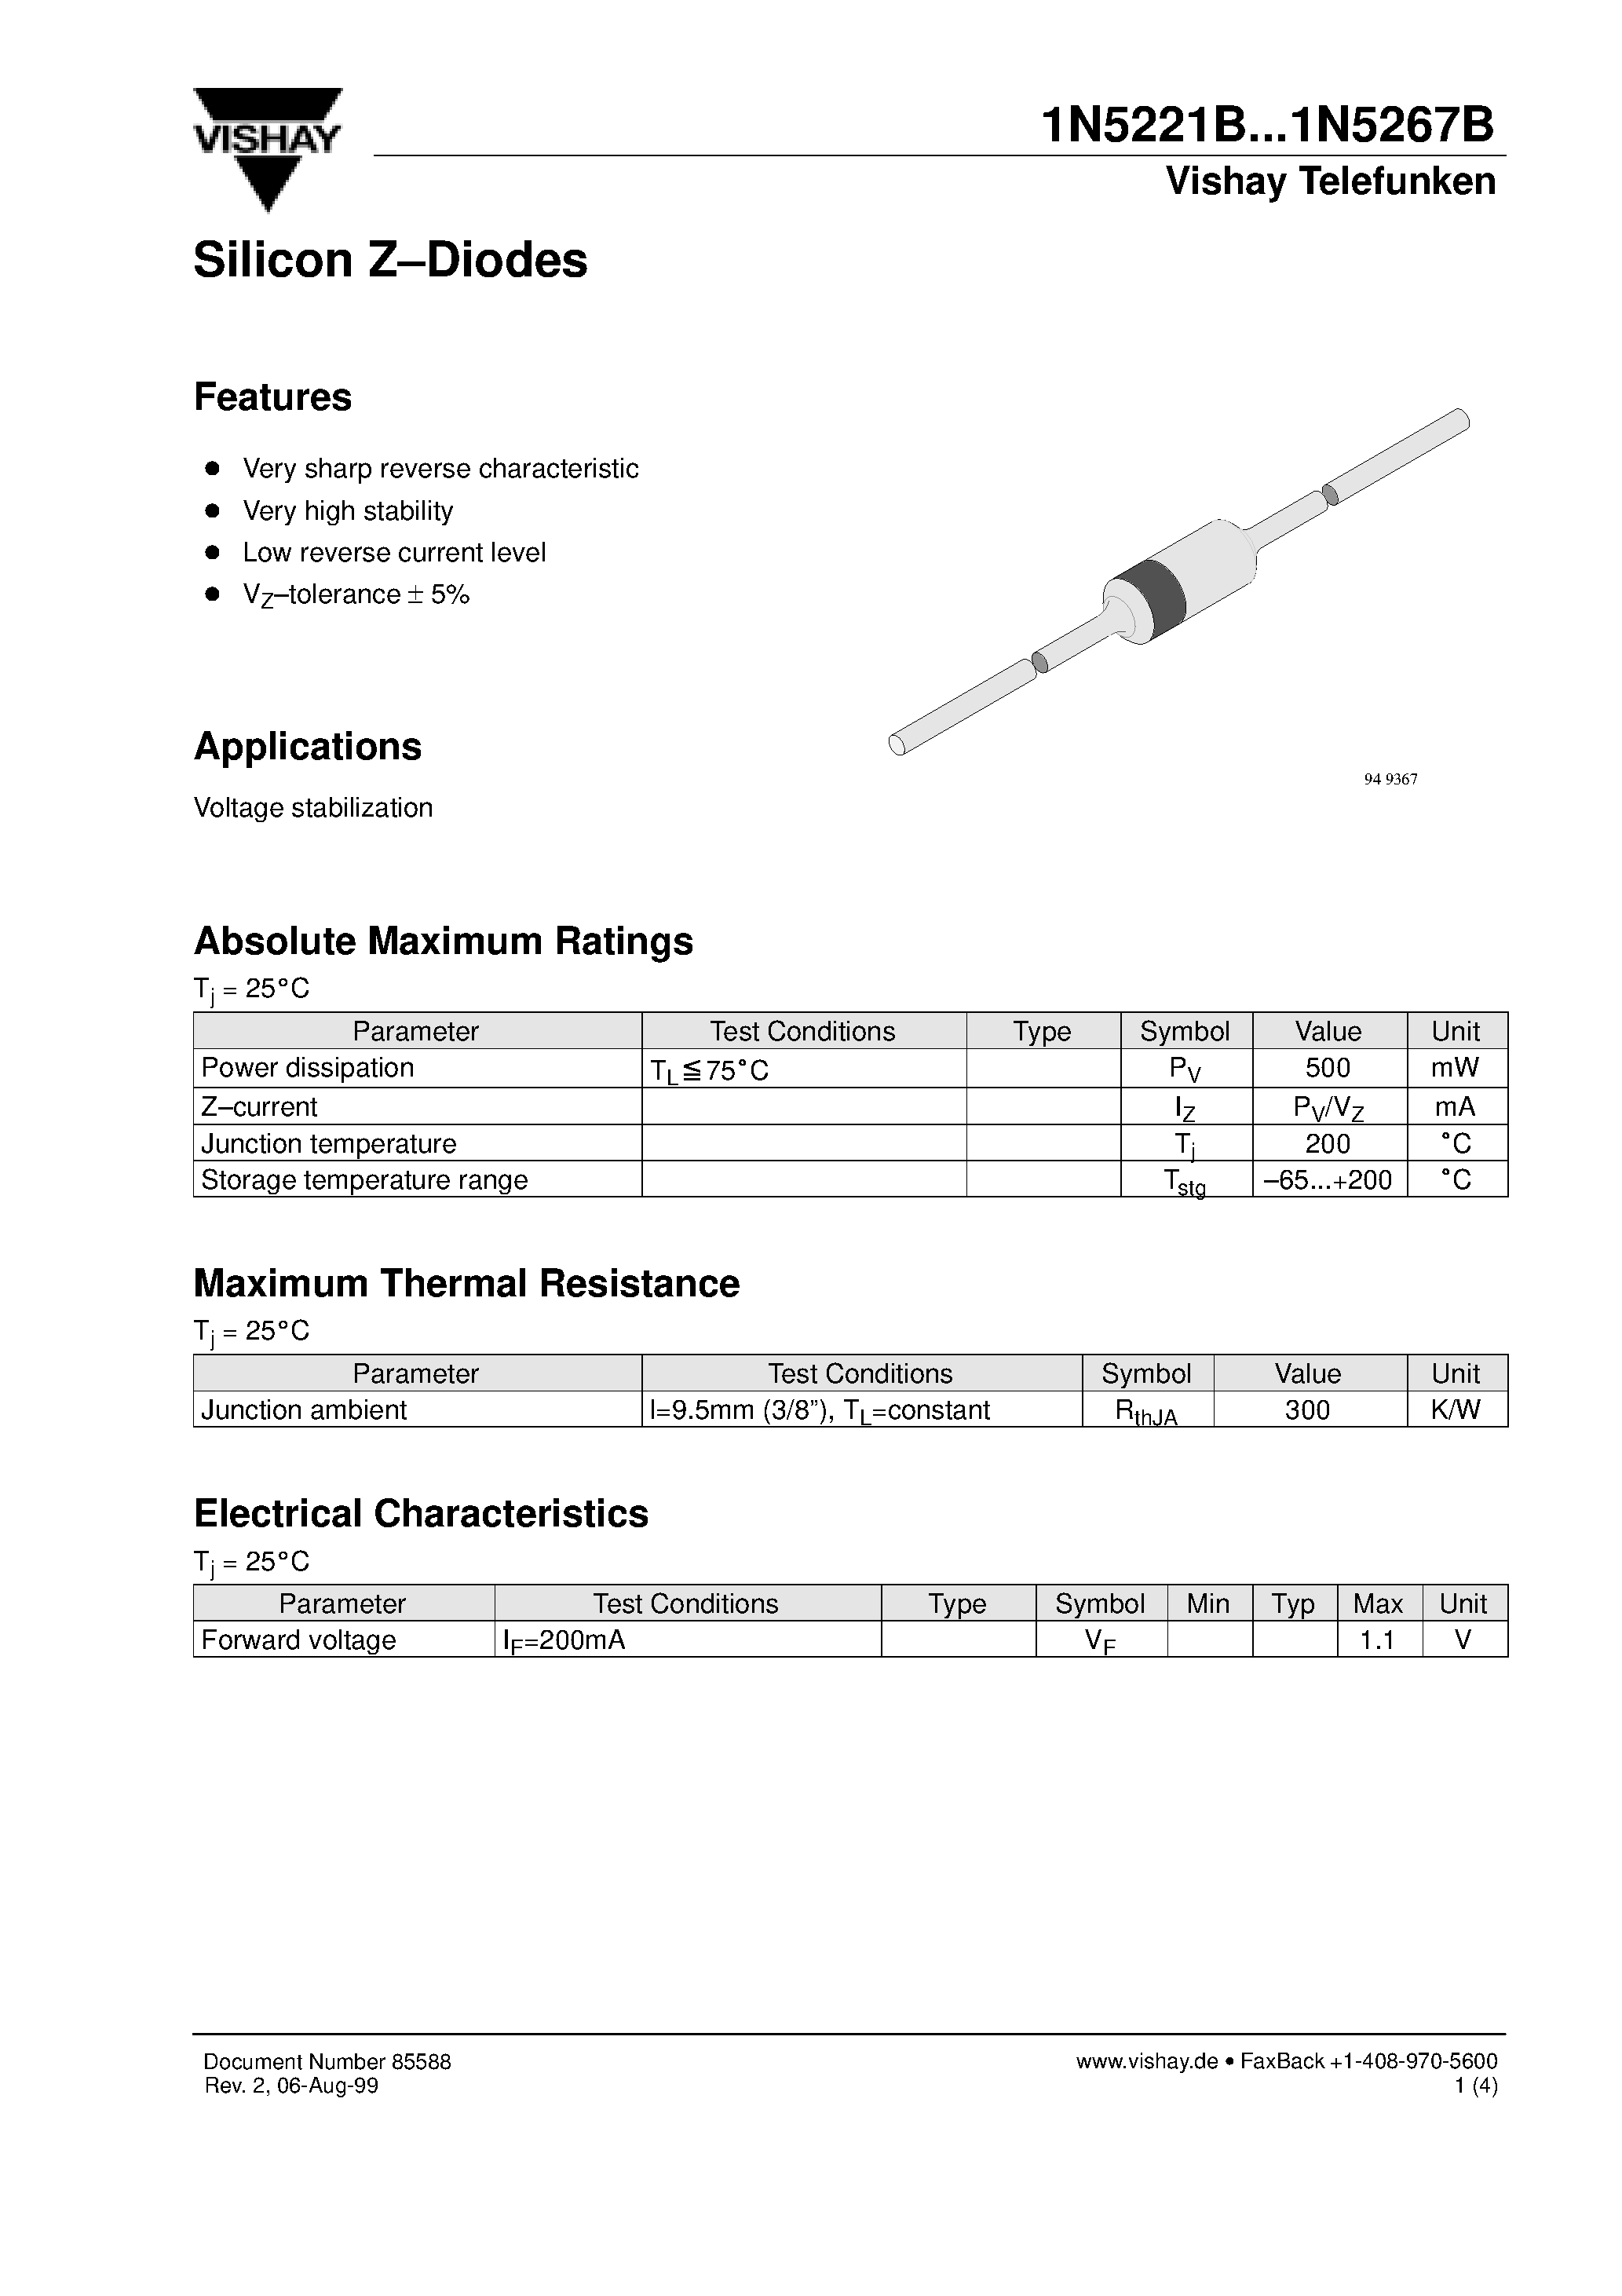 Datasheet 1N5250B - Silicon Z-Diodes page 1